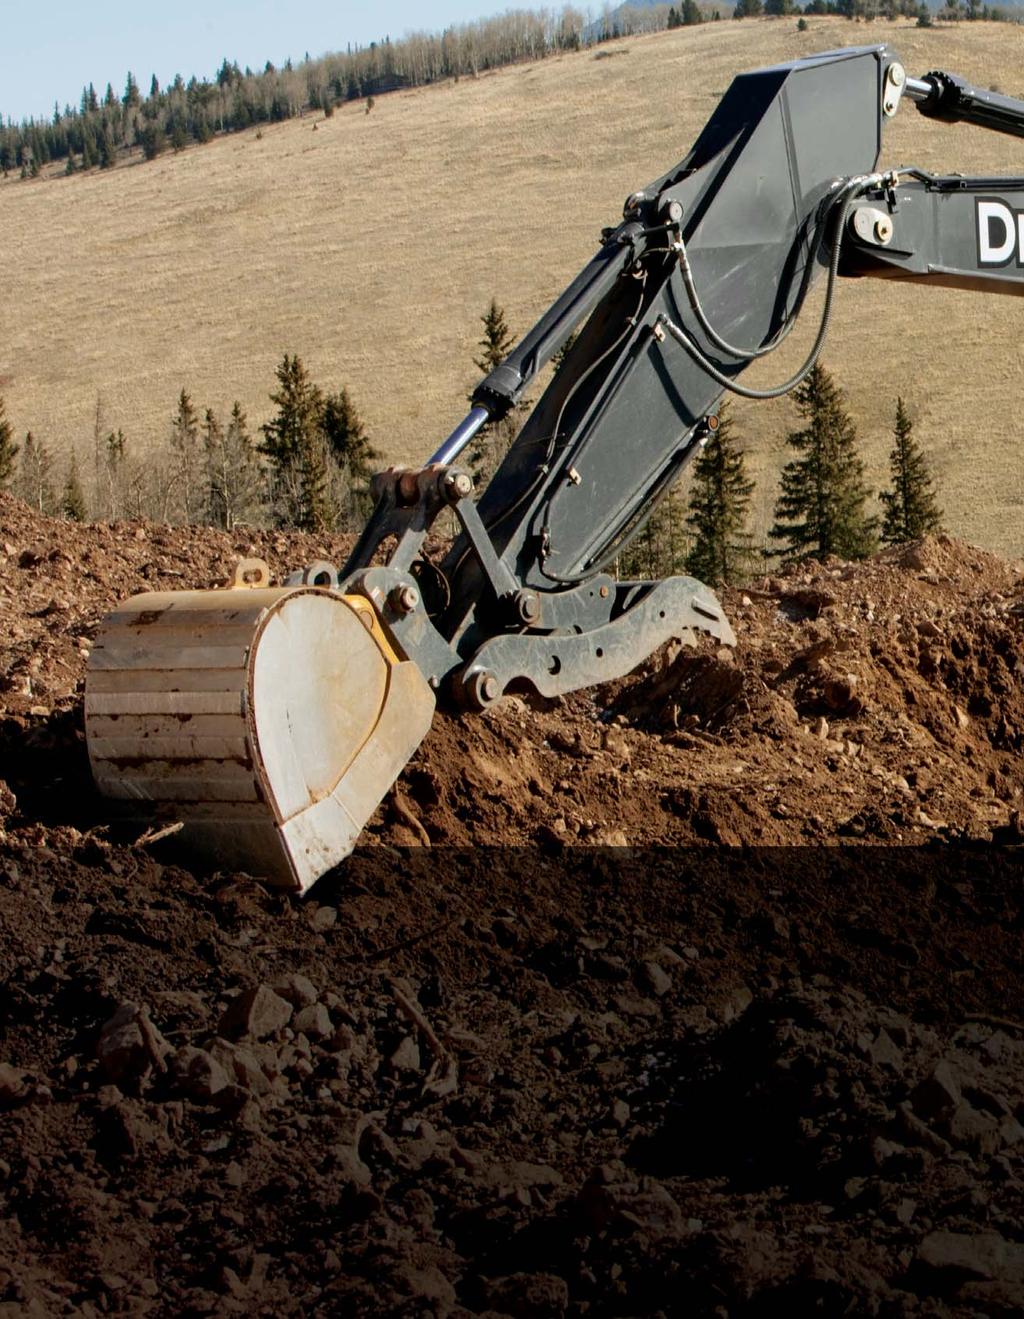 Choose from a variety of track widths, arm lengths, buckets, high-flow auxiliary hydraulic packages, and numerous other options. Work harder. And smarter.